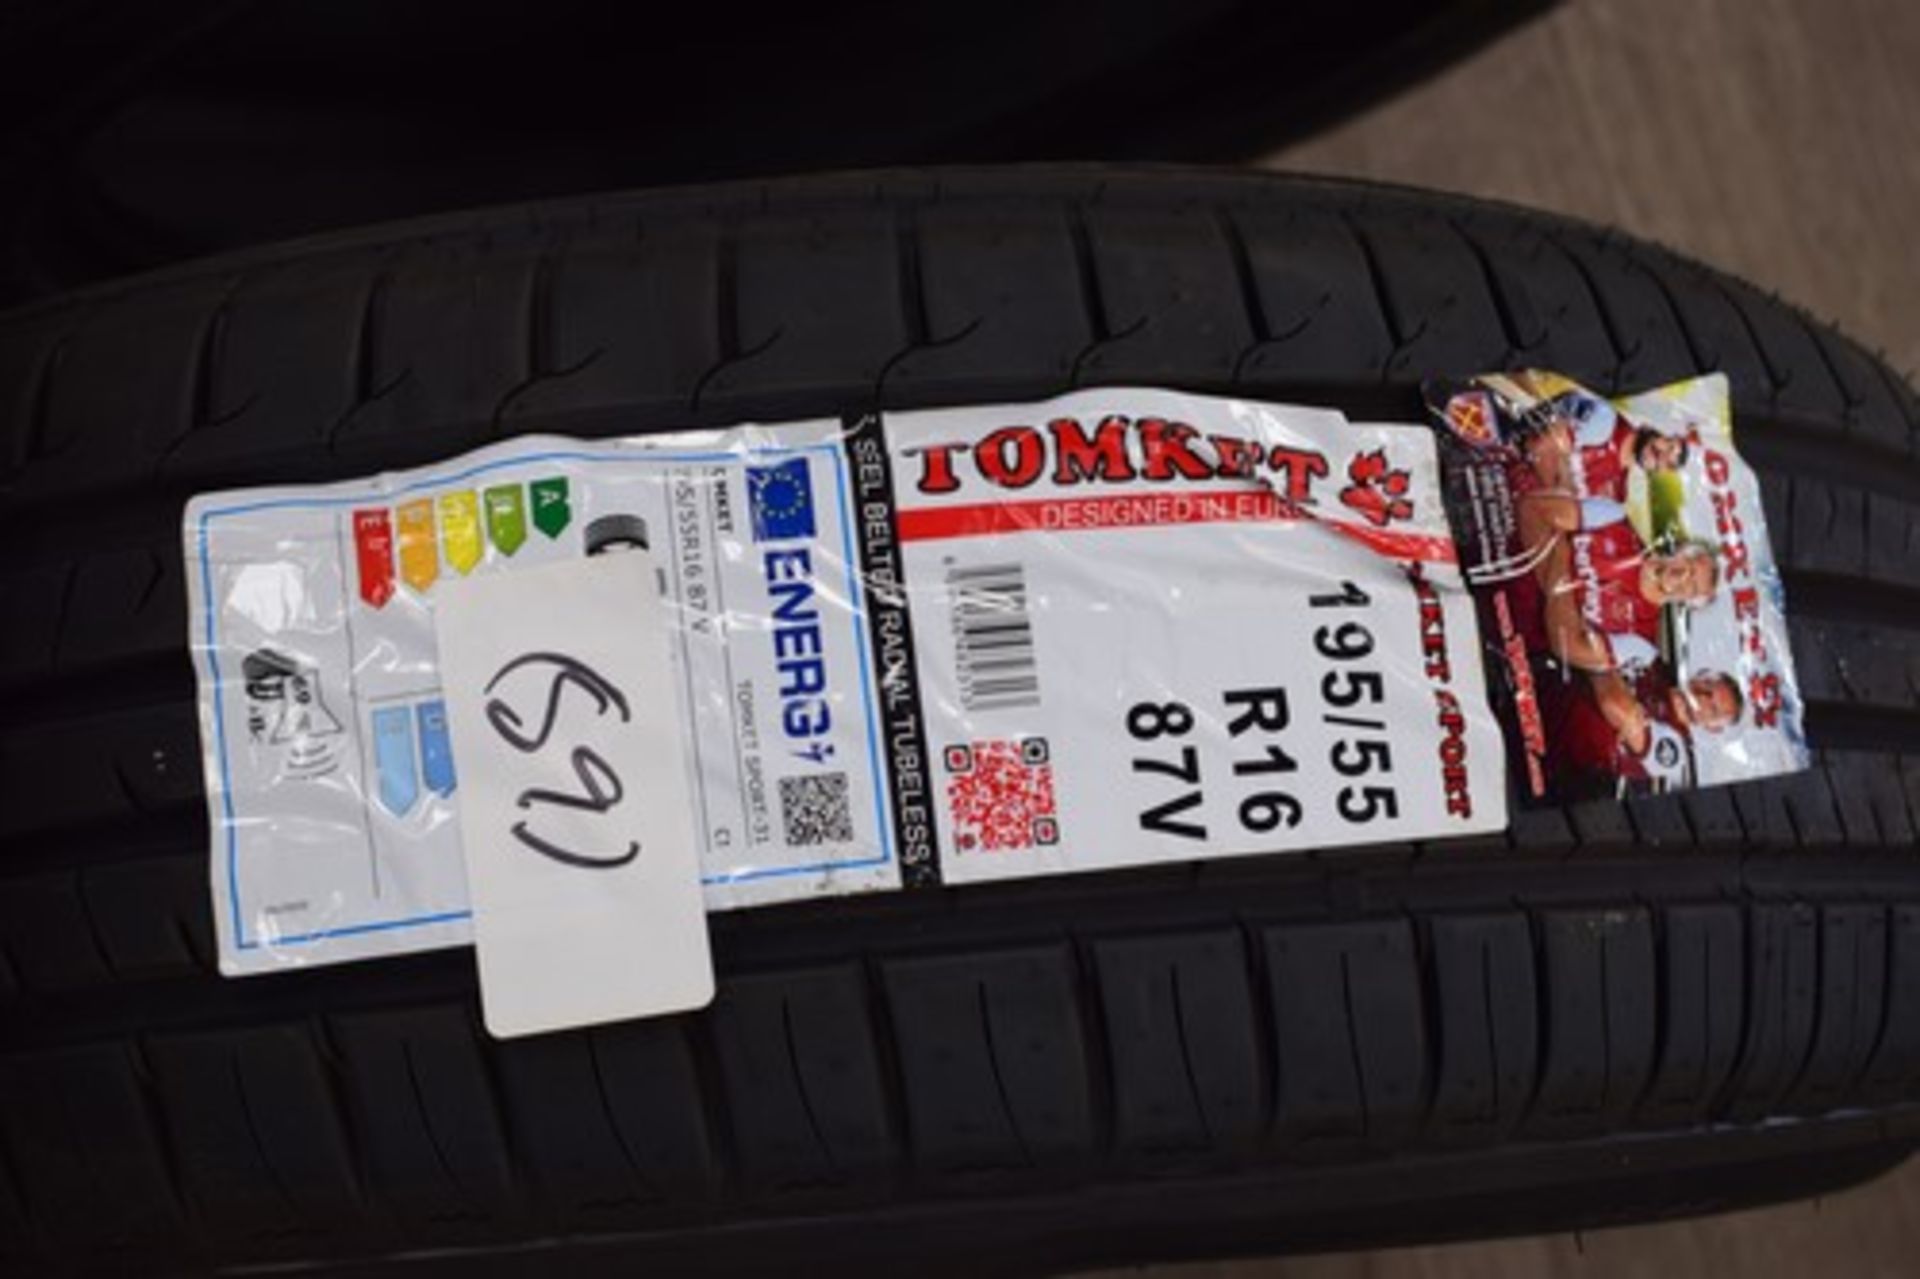 1 x Tomket Sport tyre, size 195/55 R16 87V - new with label (C5)(59)